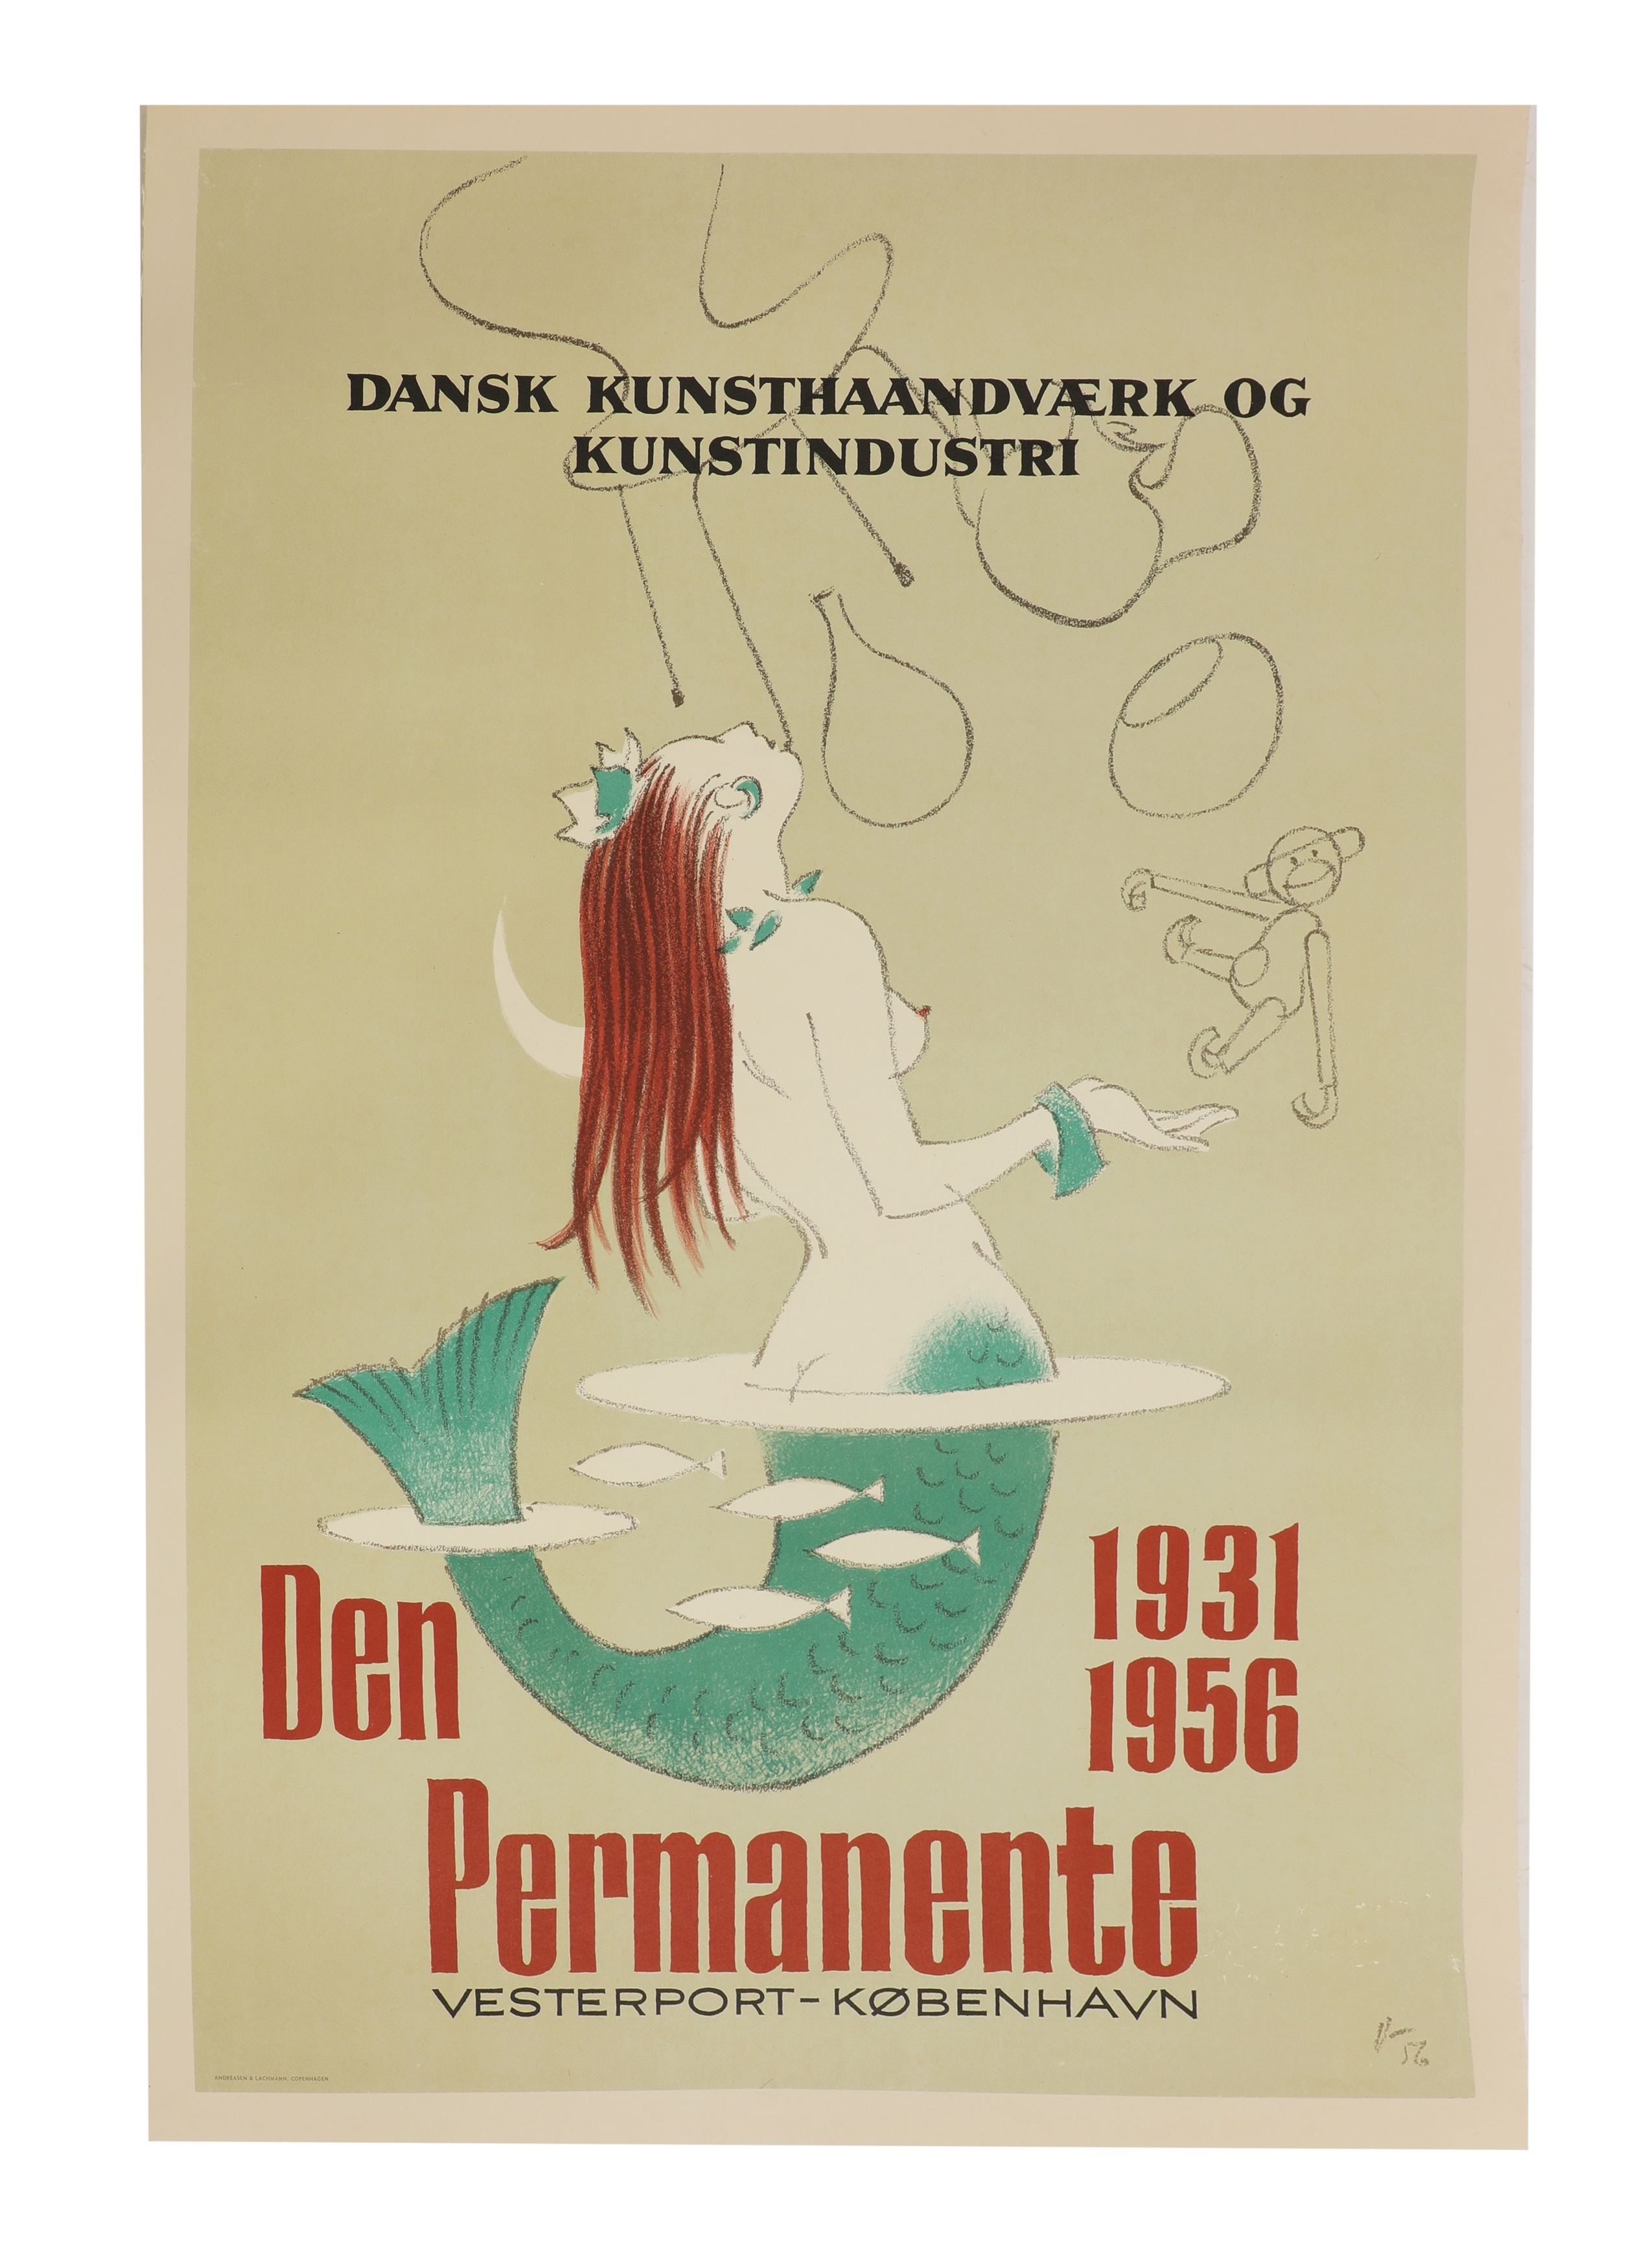 A Danish Arts and Crafts and Industrial Design poster - Arne Ungermann